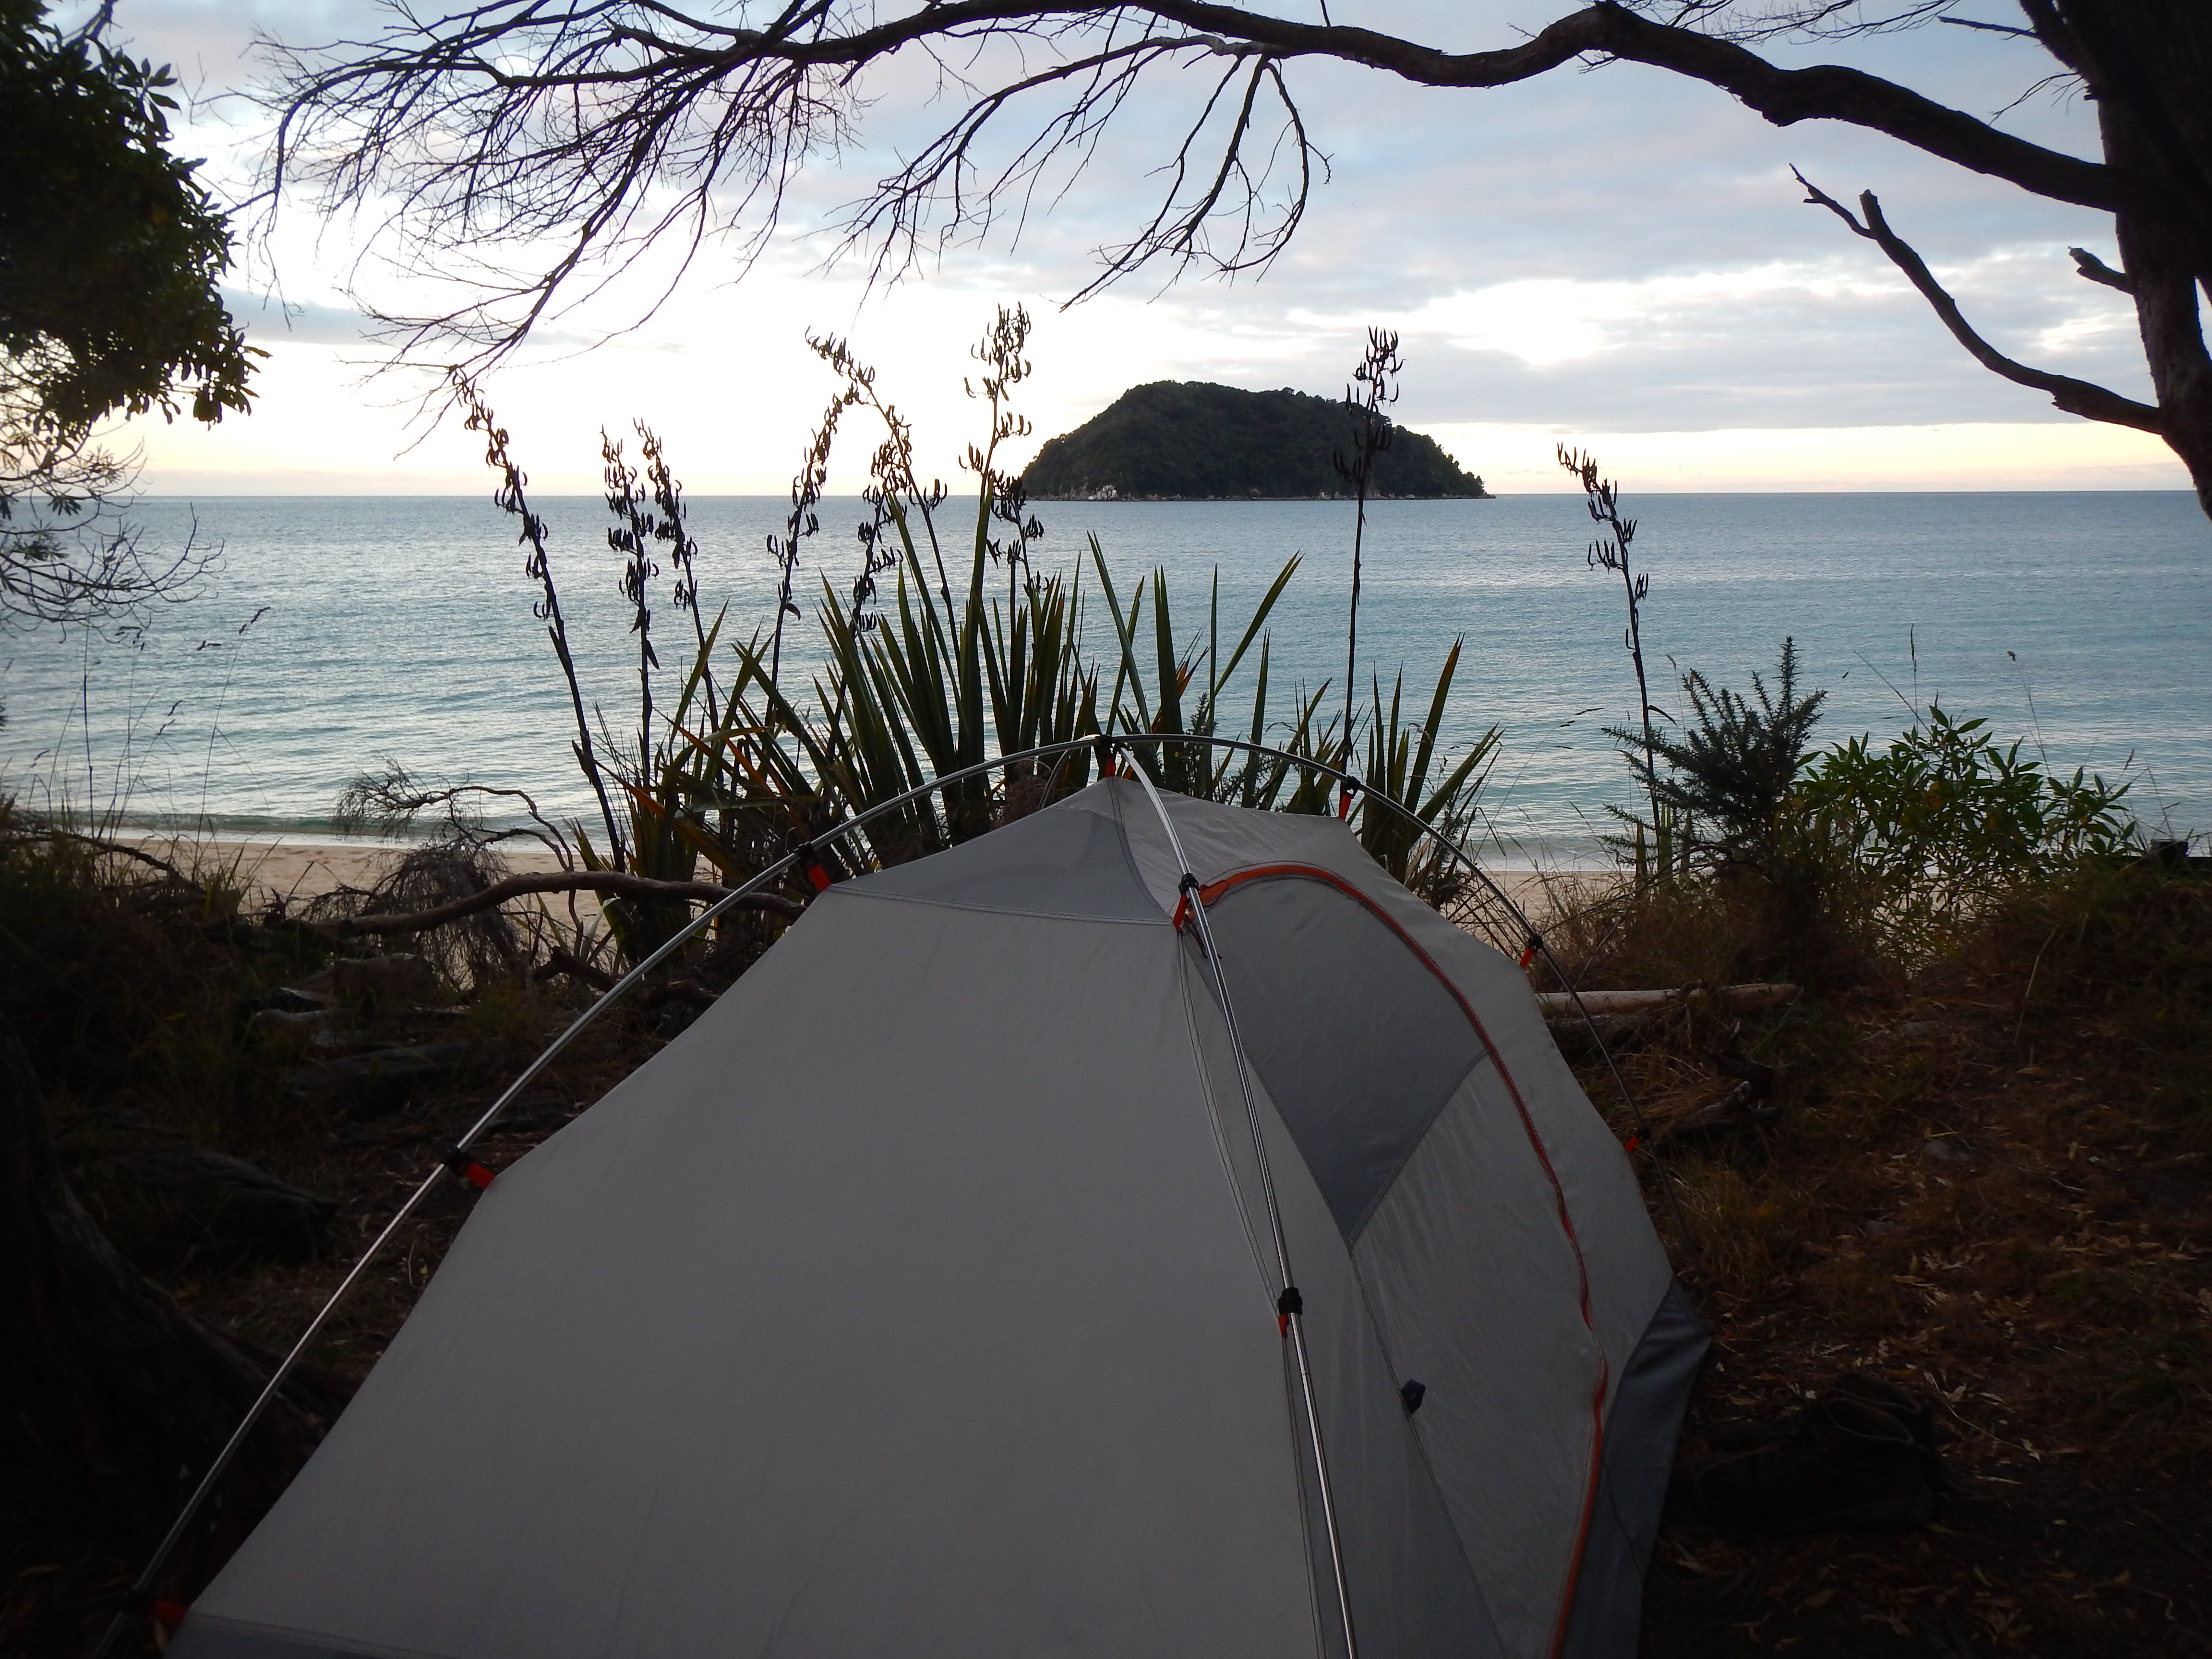 Setting up a tent in Tonga Quarry hunting.places.